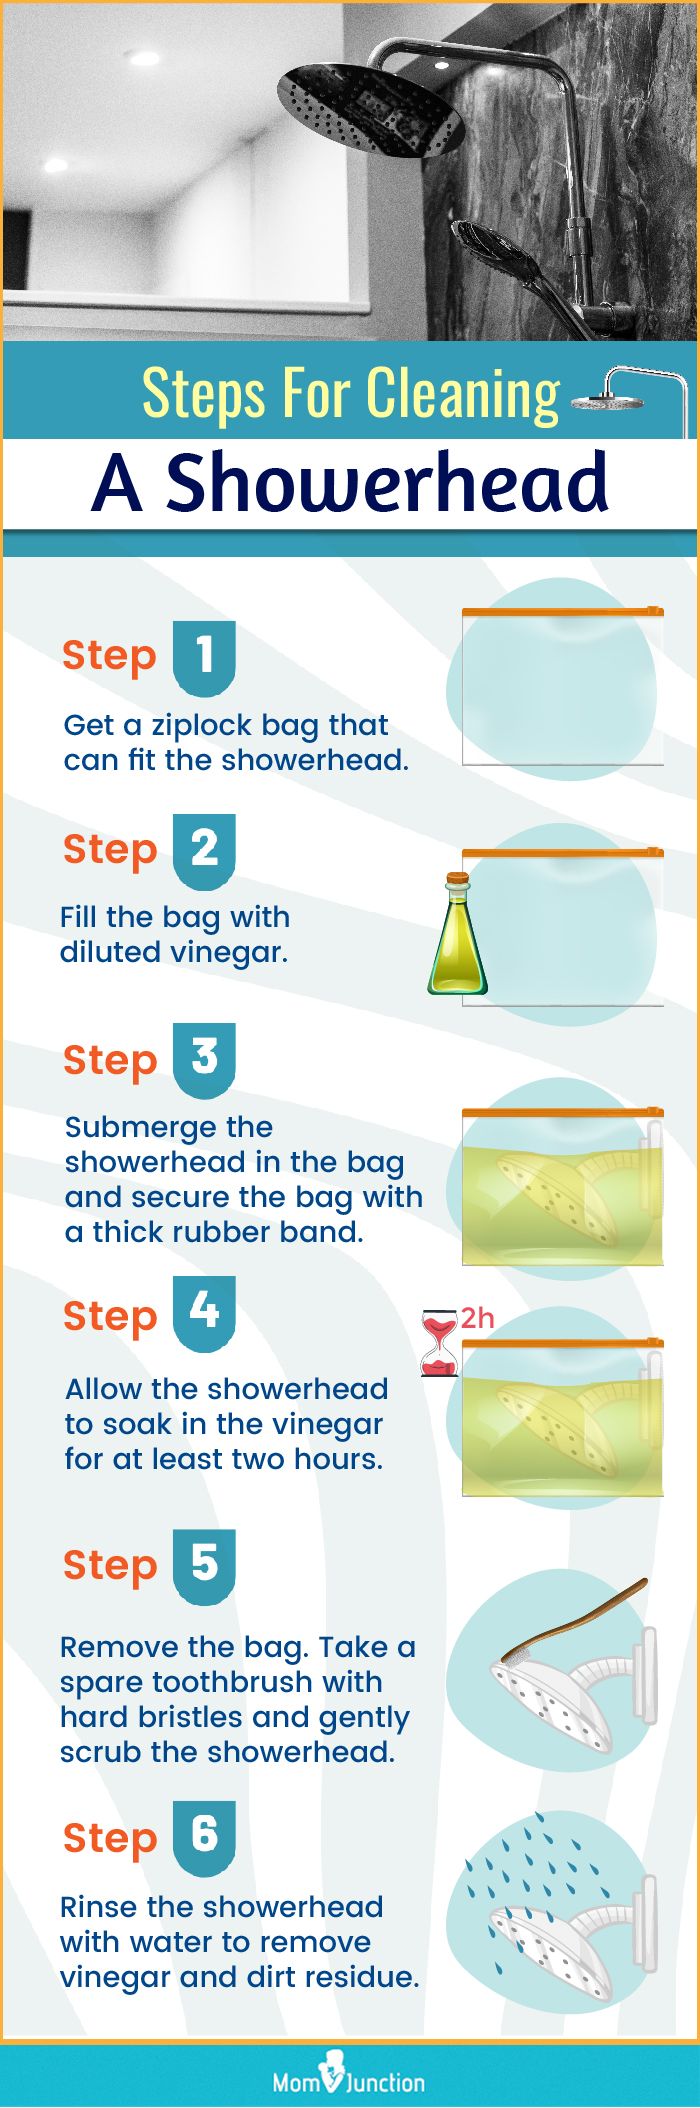 Steps For Cleaning A Showerhead. (infographic)